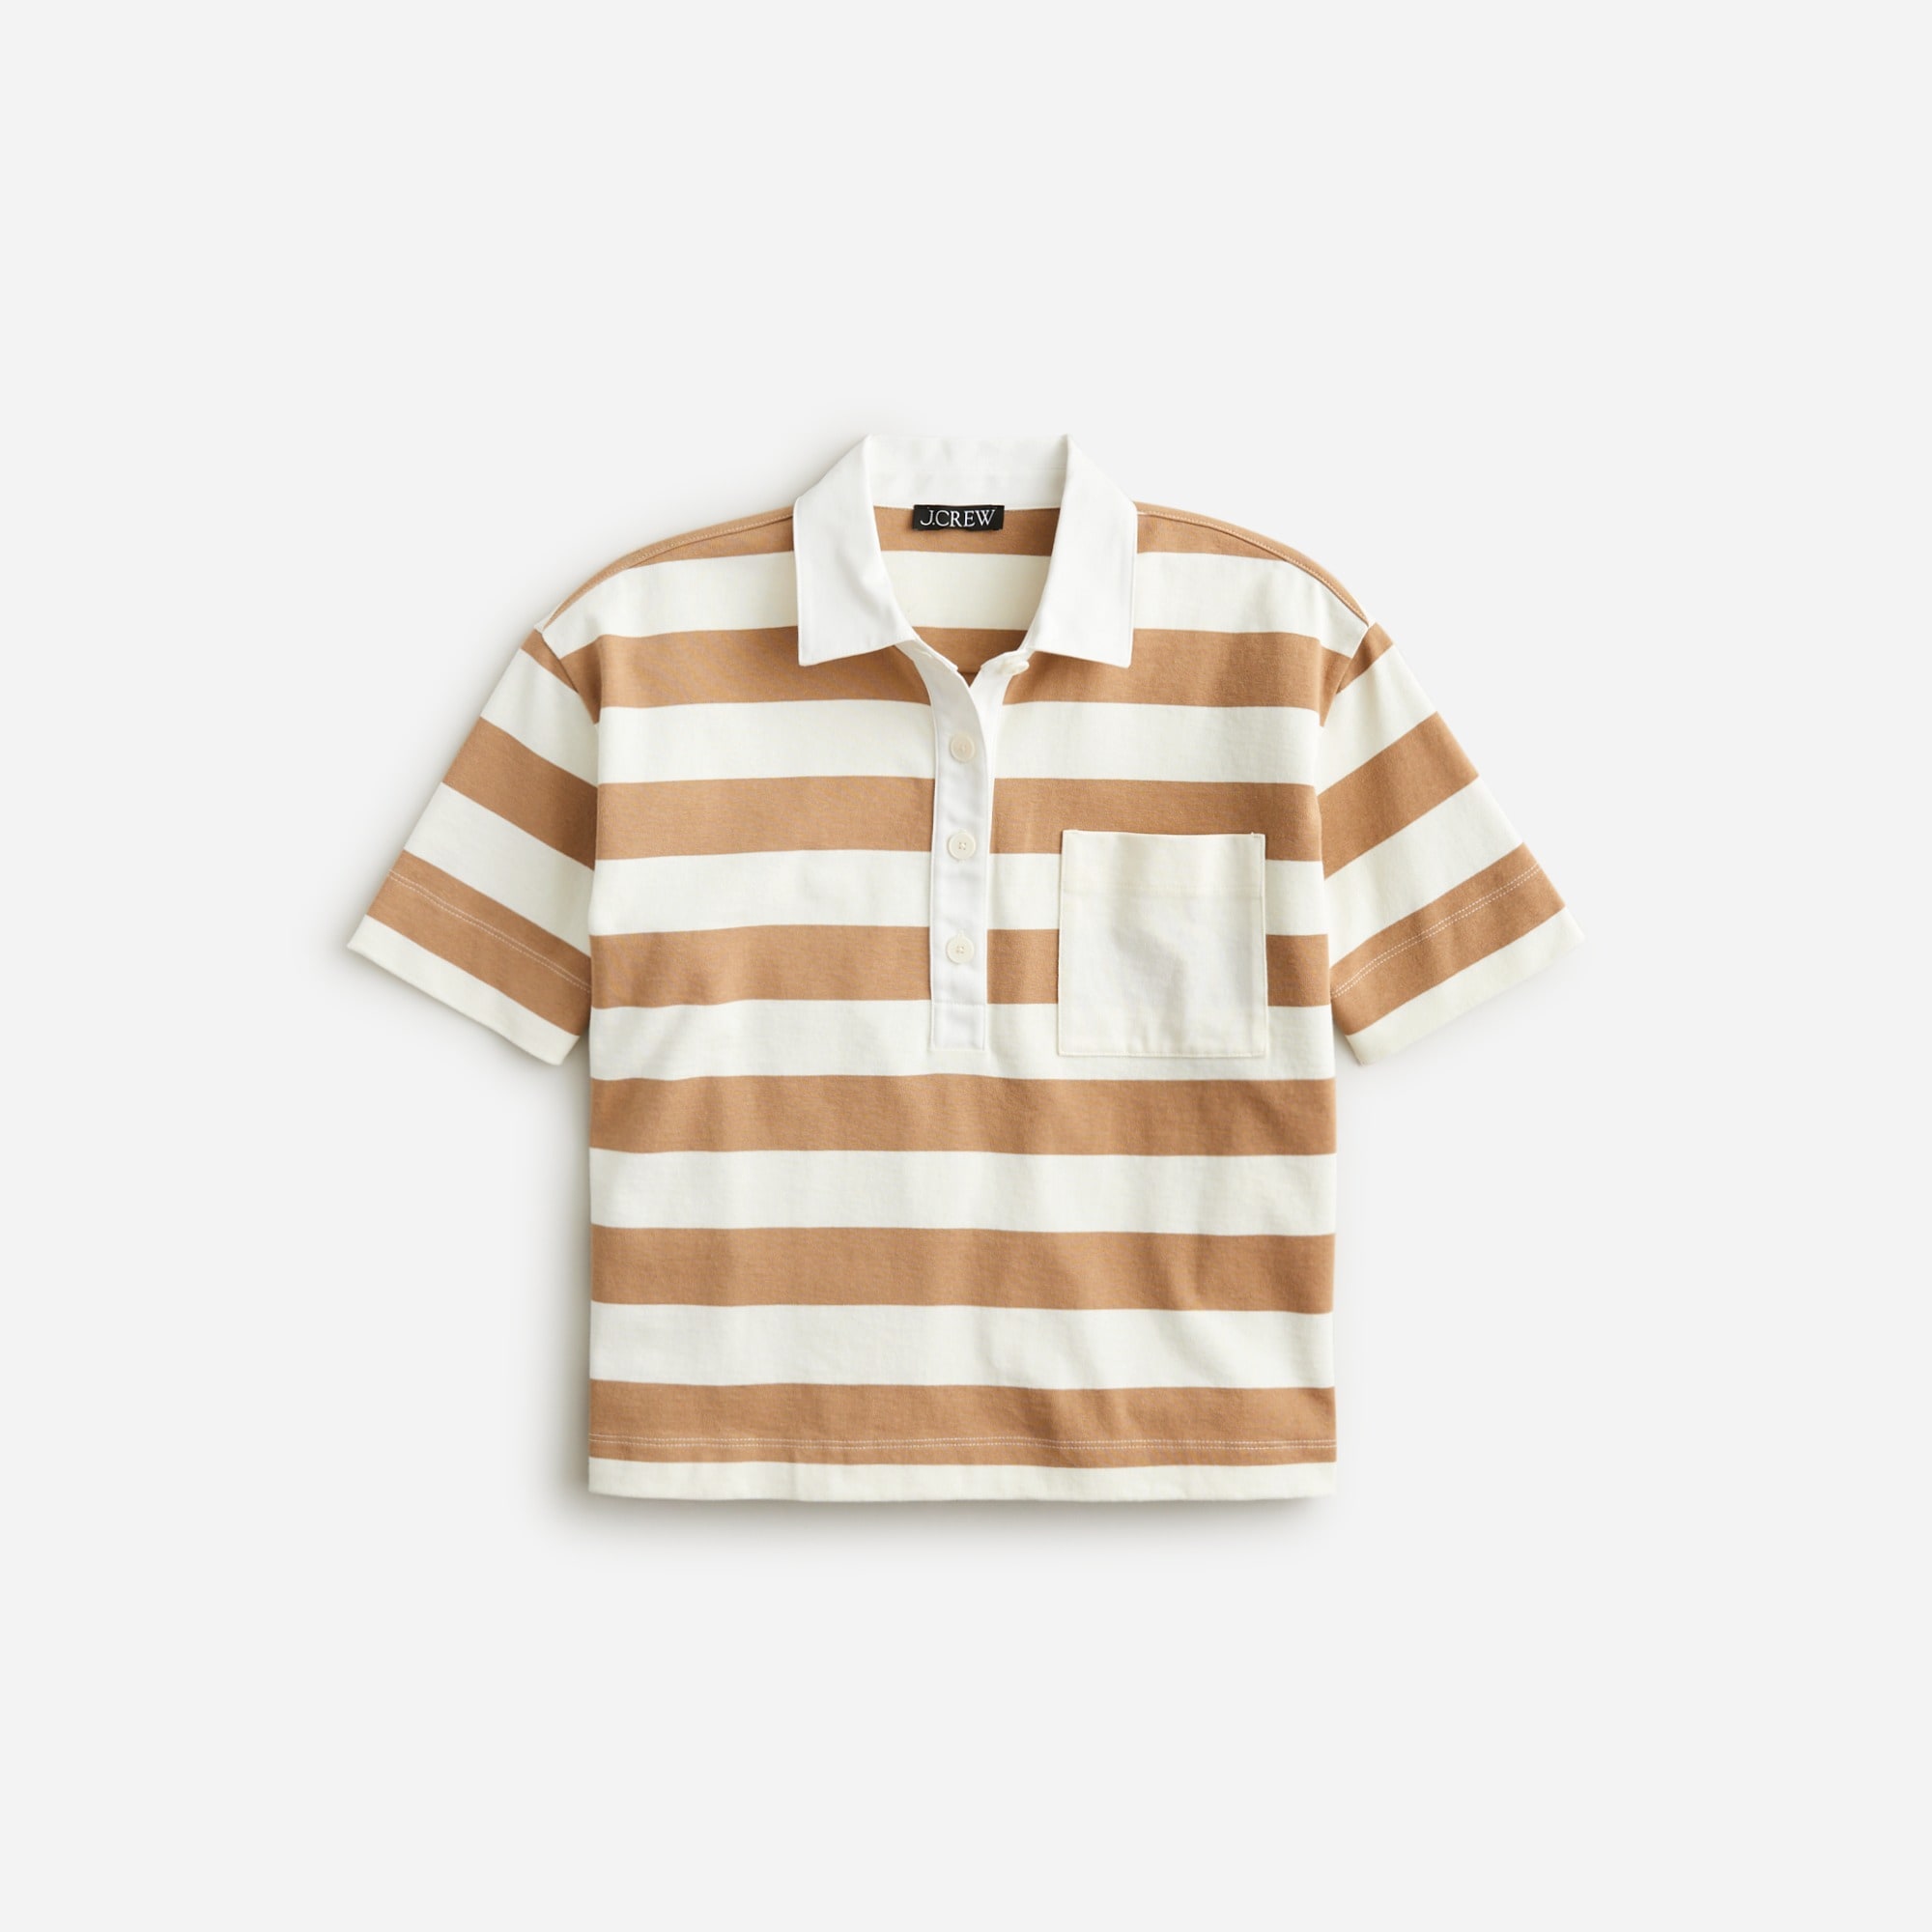  Polo T-shirt in stripe mariner cotton